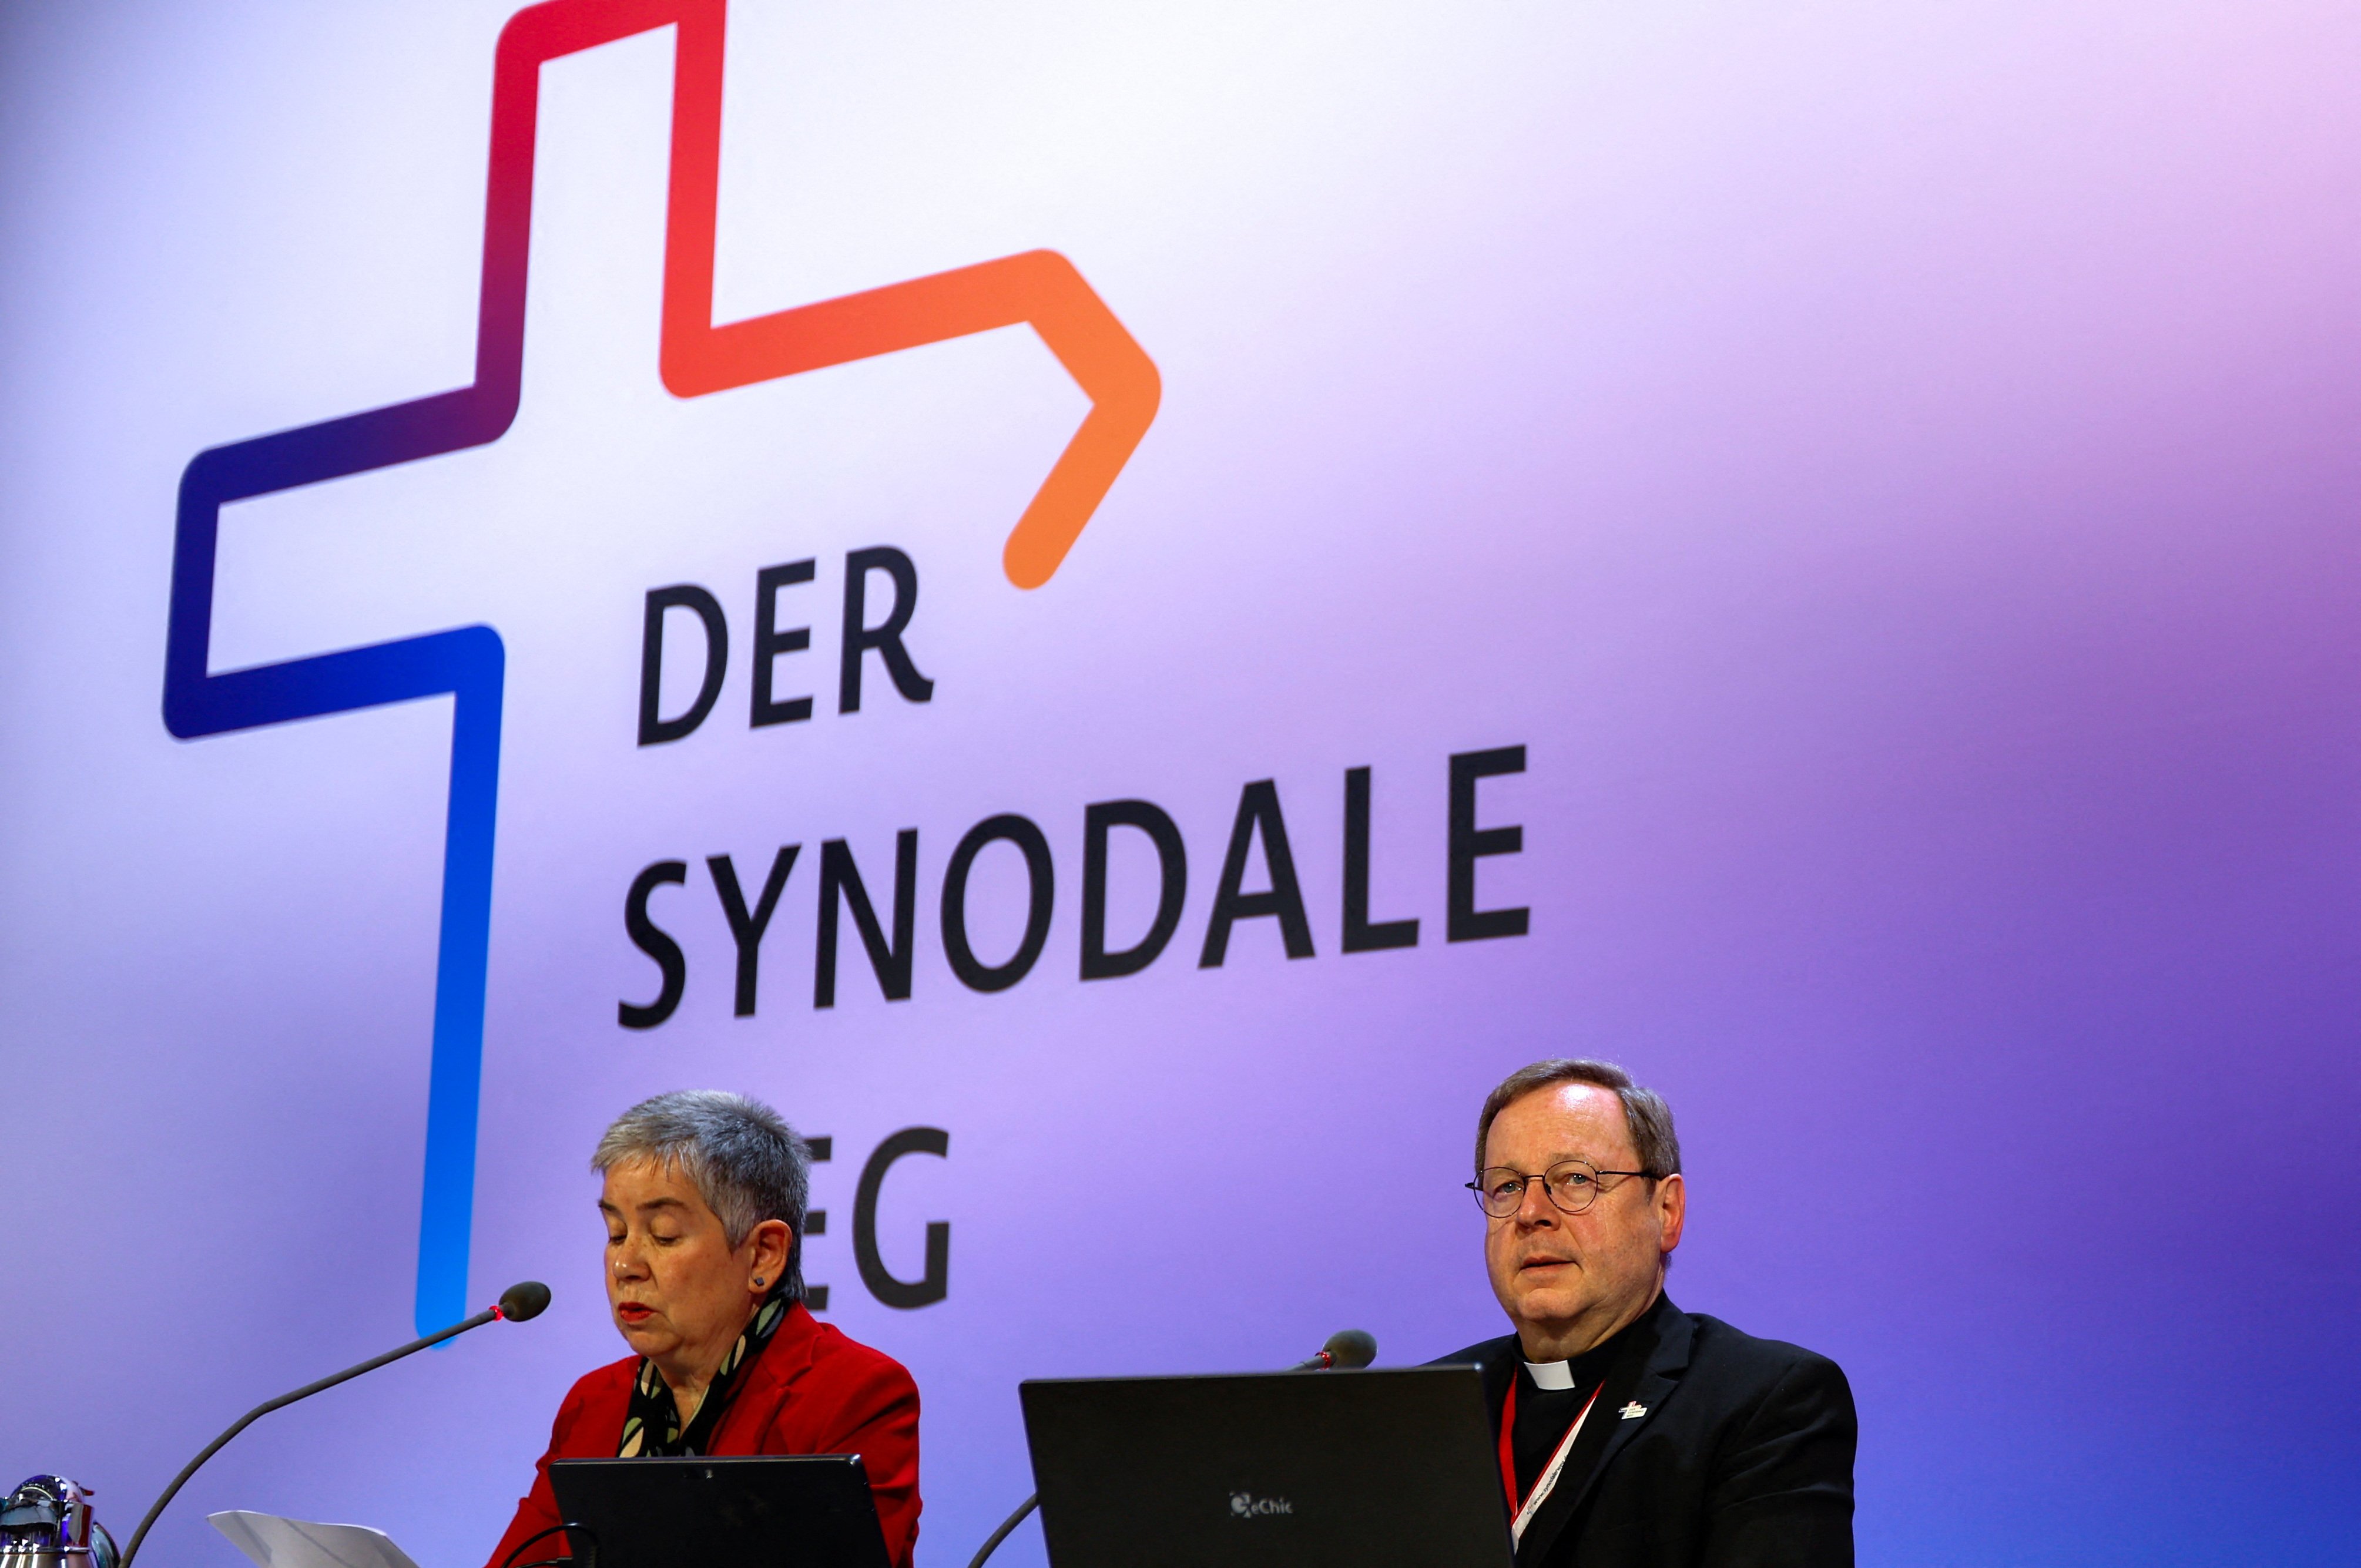 Irme Stetter-Karp, president of the Central Committee of German Catholics and co-chair of the Synodal Path, and Bishop Georg Bätzing, president of the German bishops' conference, sit in front of a screen that says "der Synodale Weg," or "The Synodal Path."attend the fifth synodal assembly in Frankfurt March 9. 